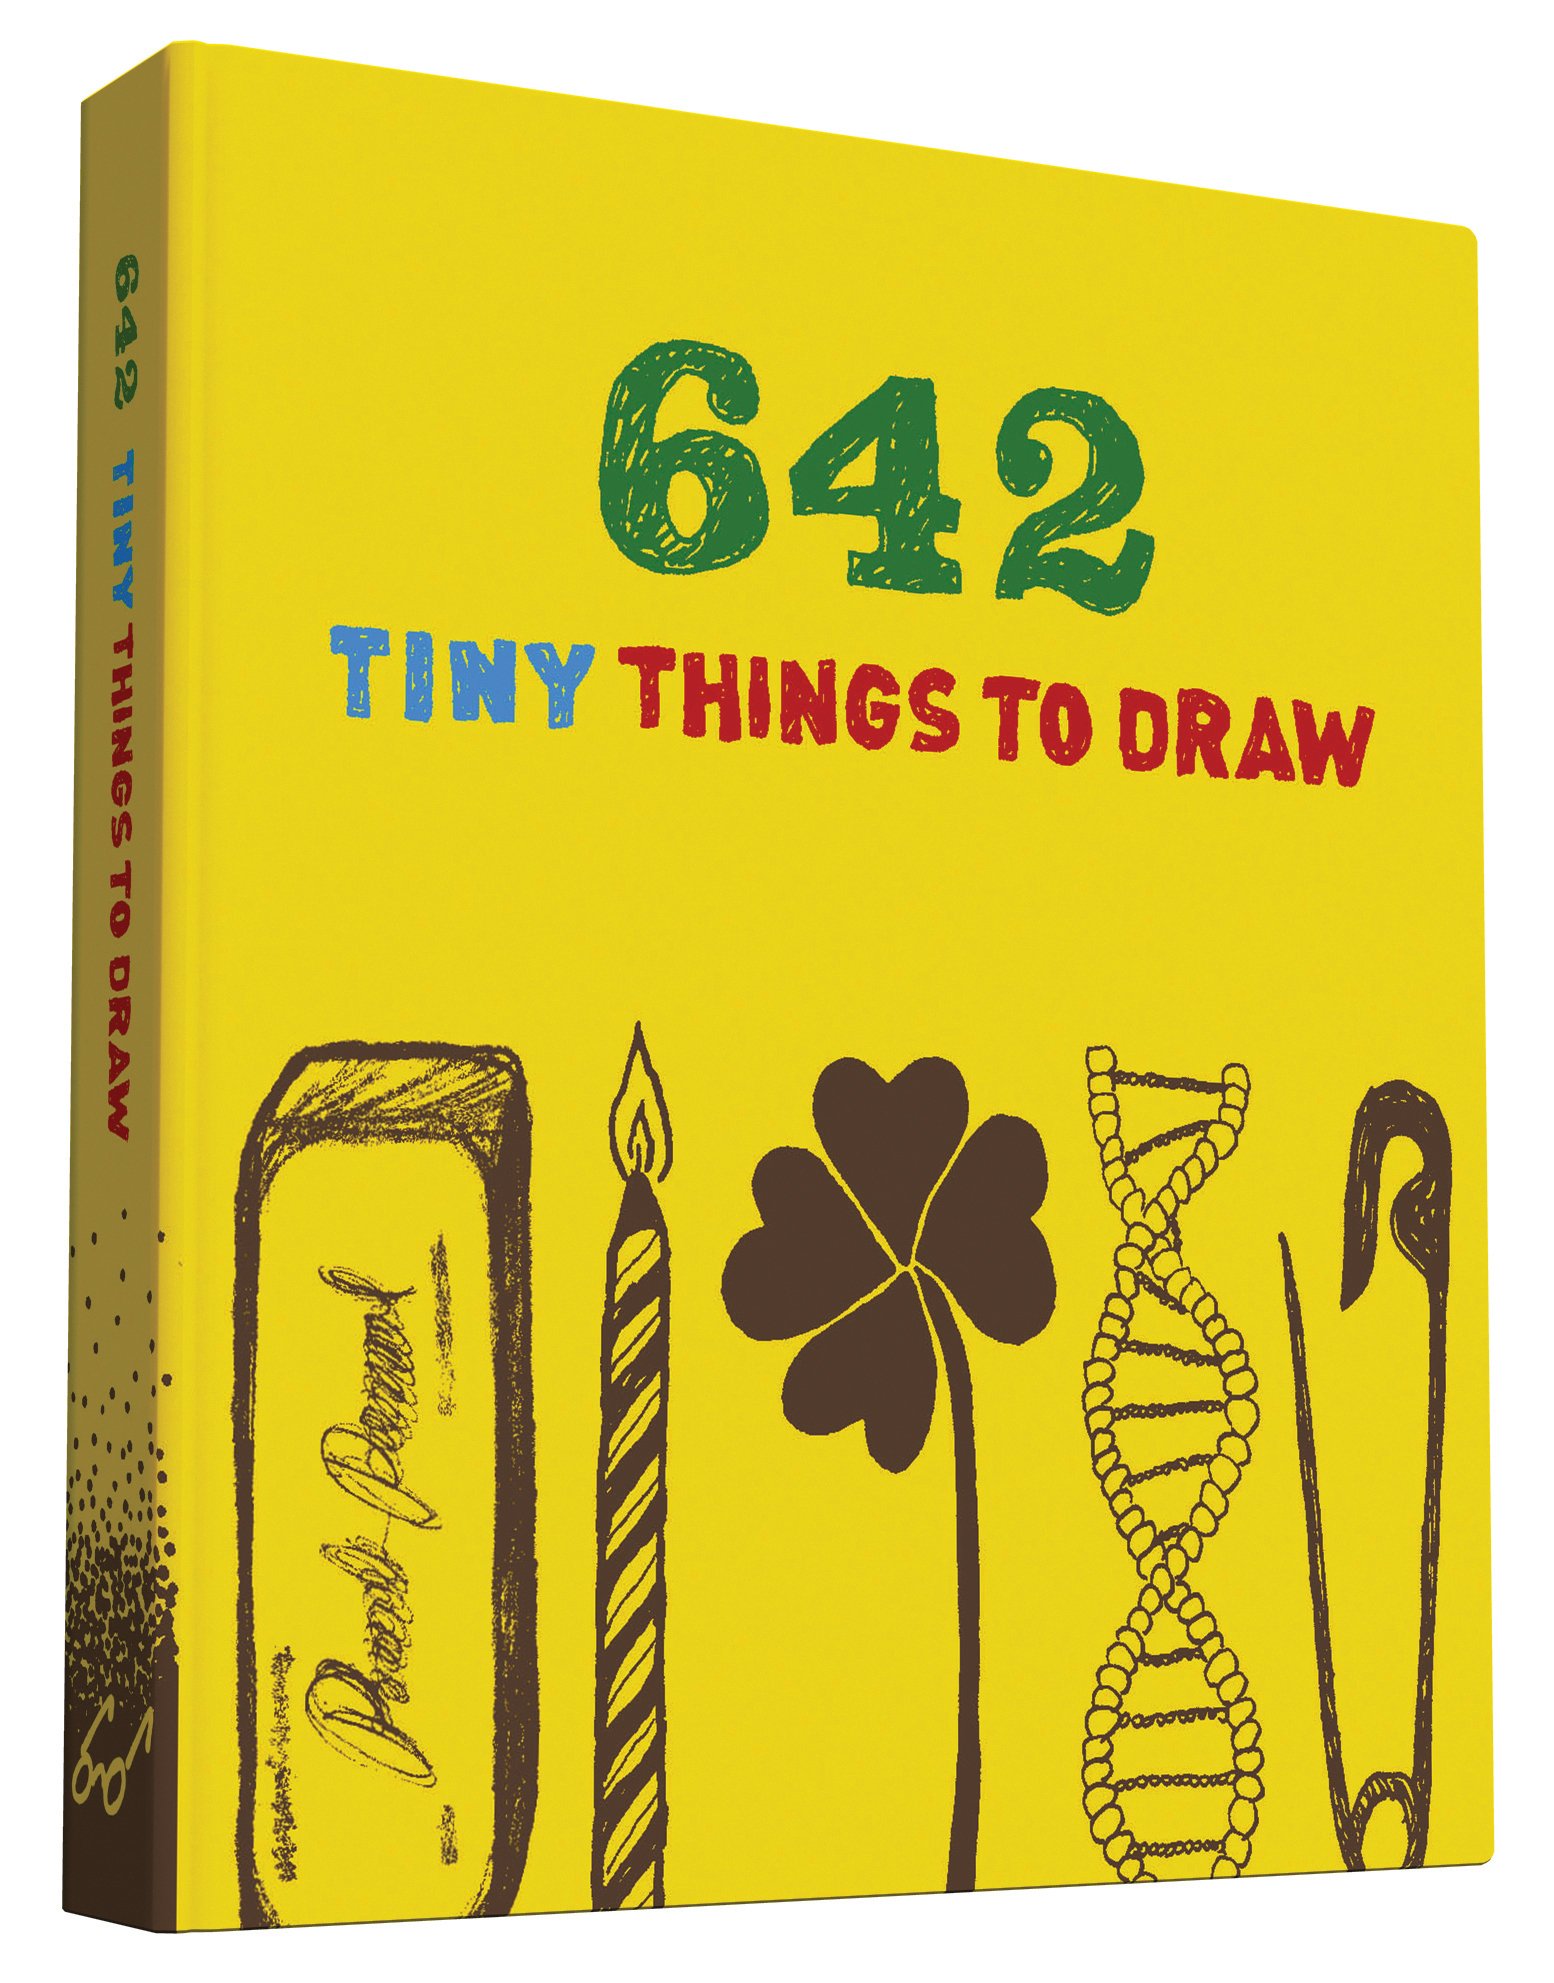 642 Tiny Things to Draw | Chronicle Books